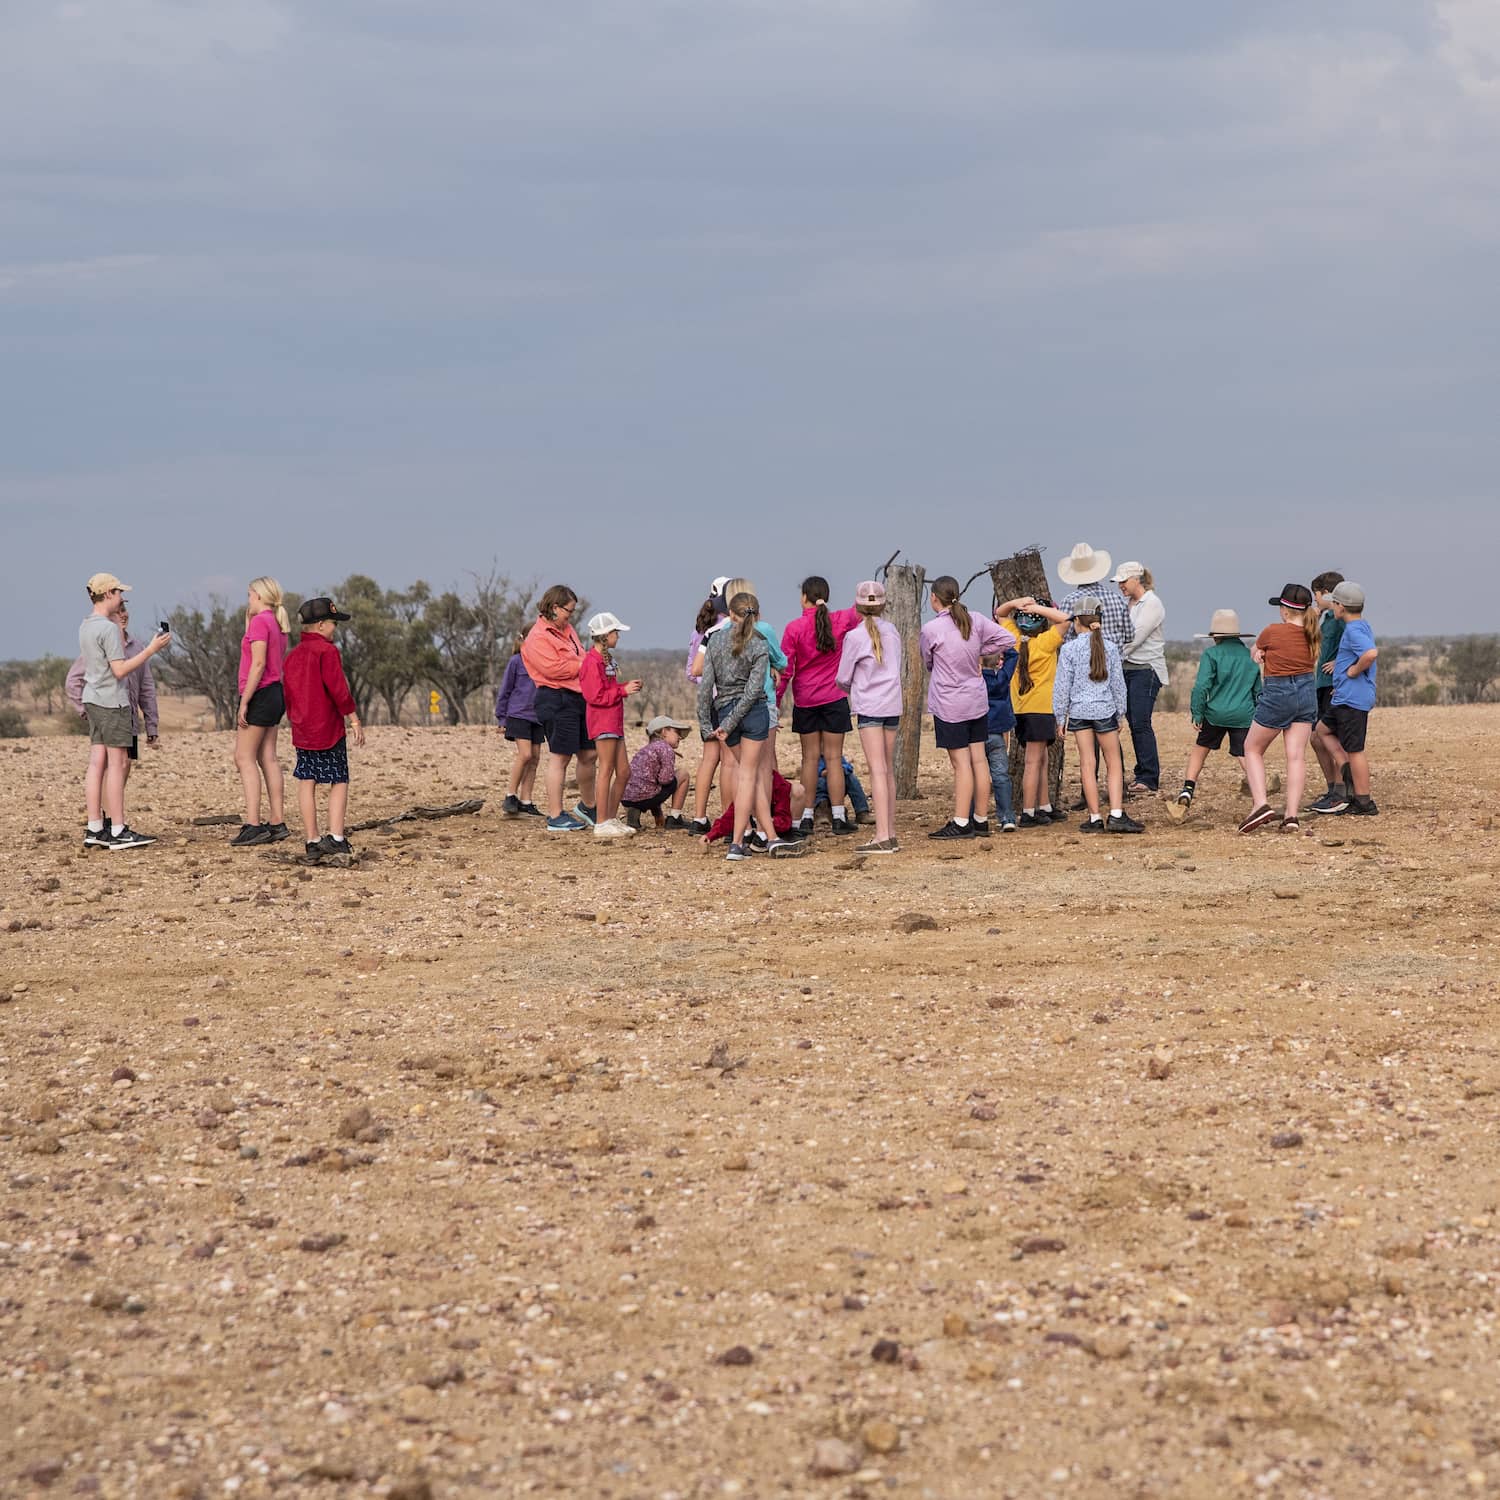 Students standing together on an outback ridge at dusk